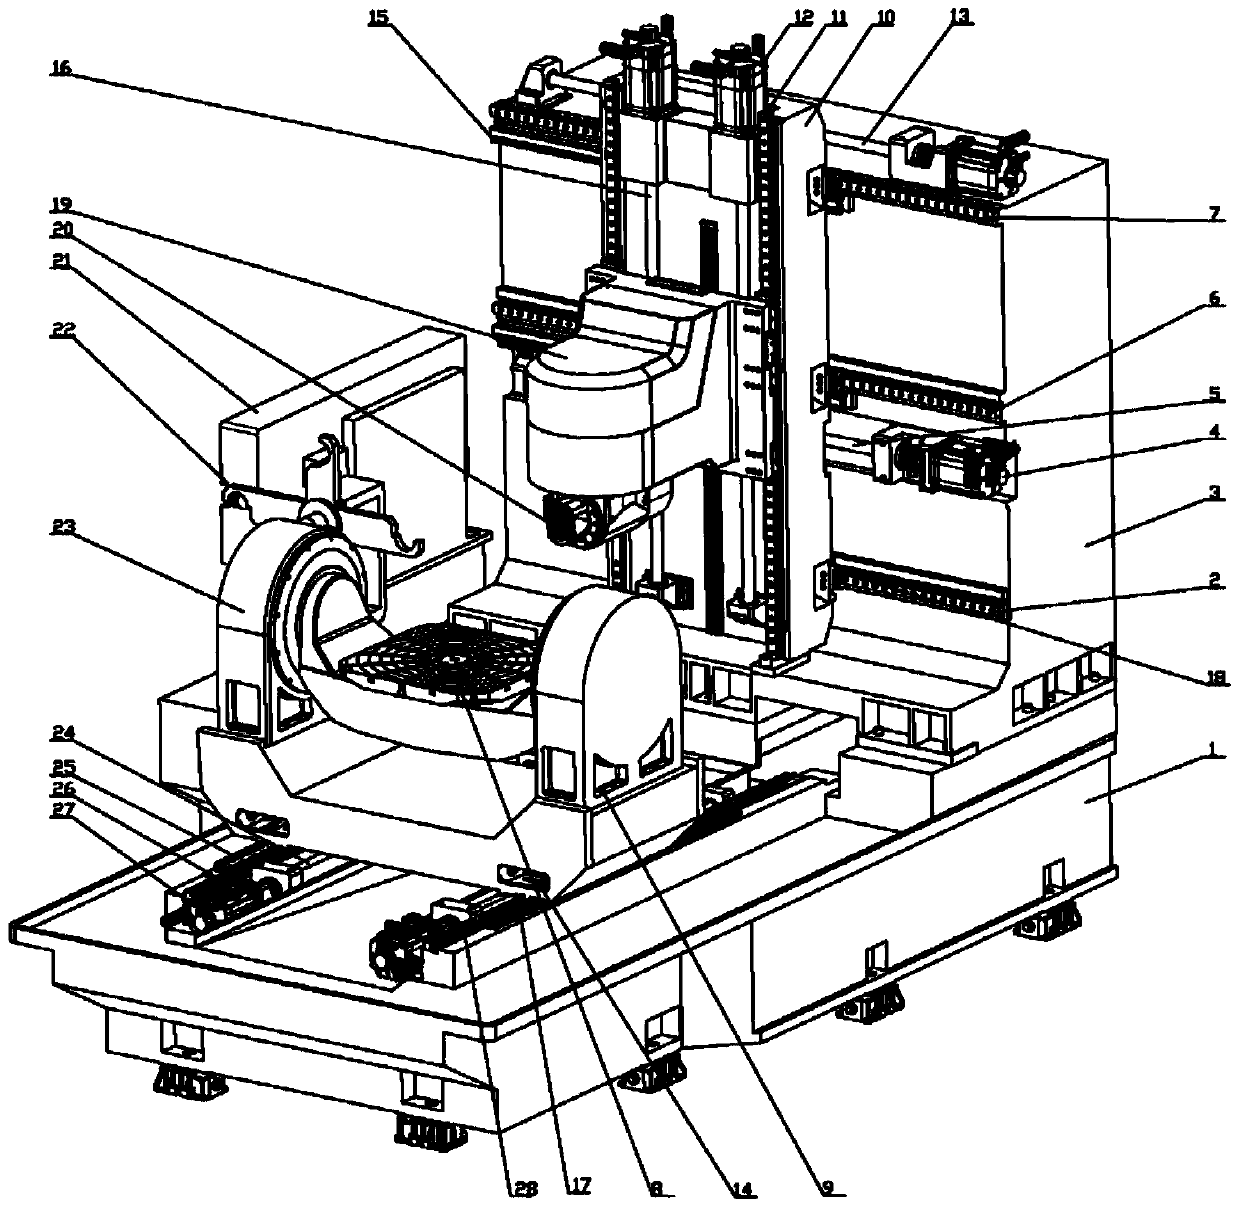 A five-axis compound machining center with horizontal cradle structure